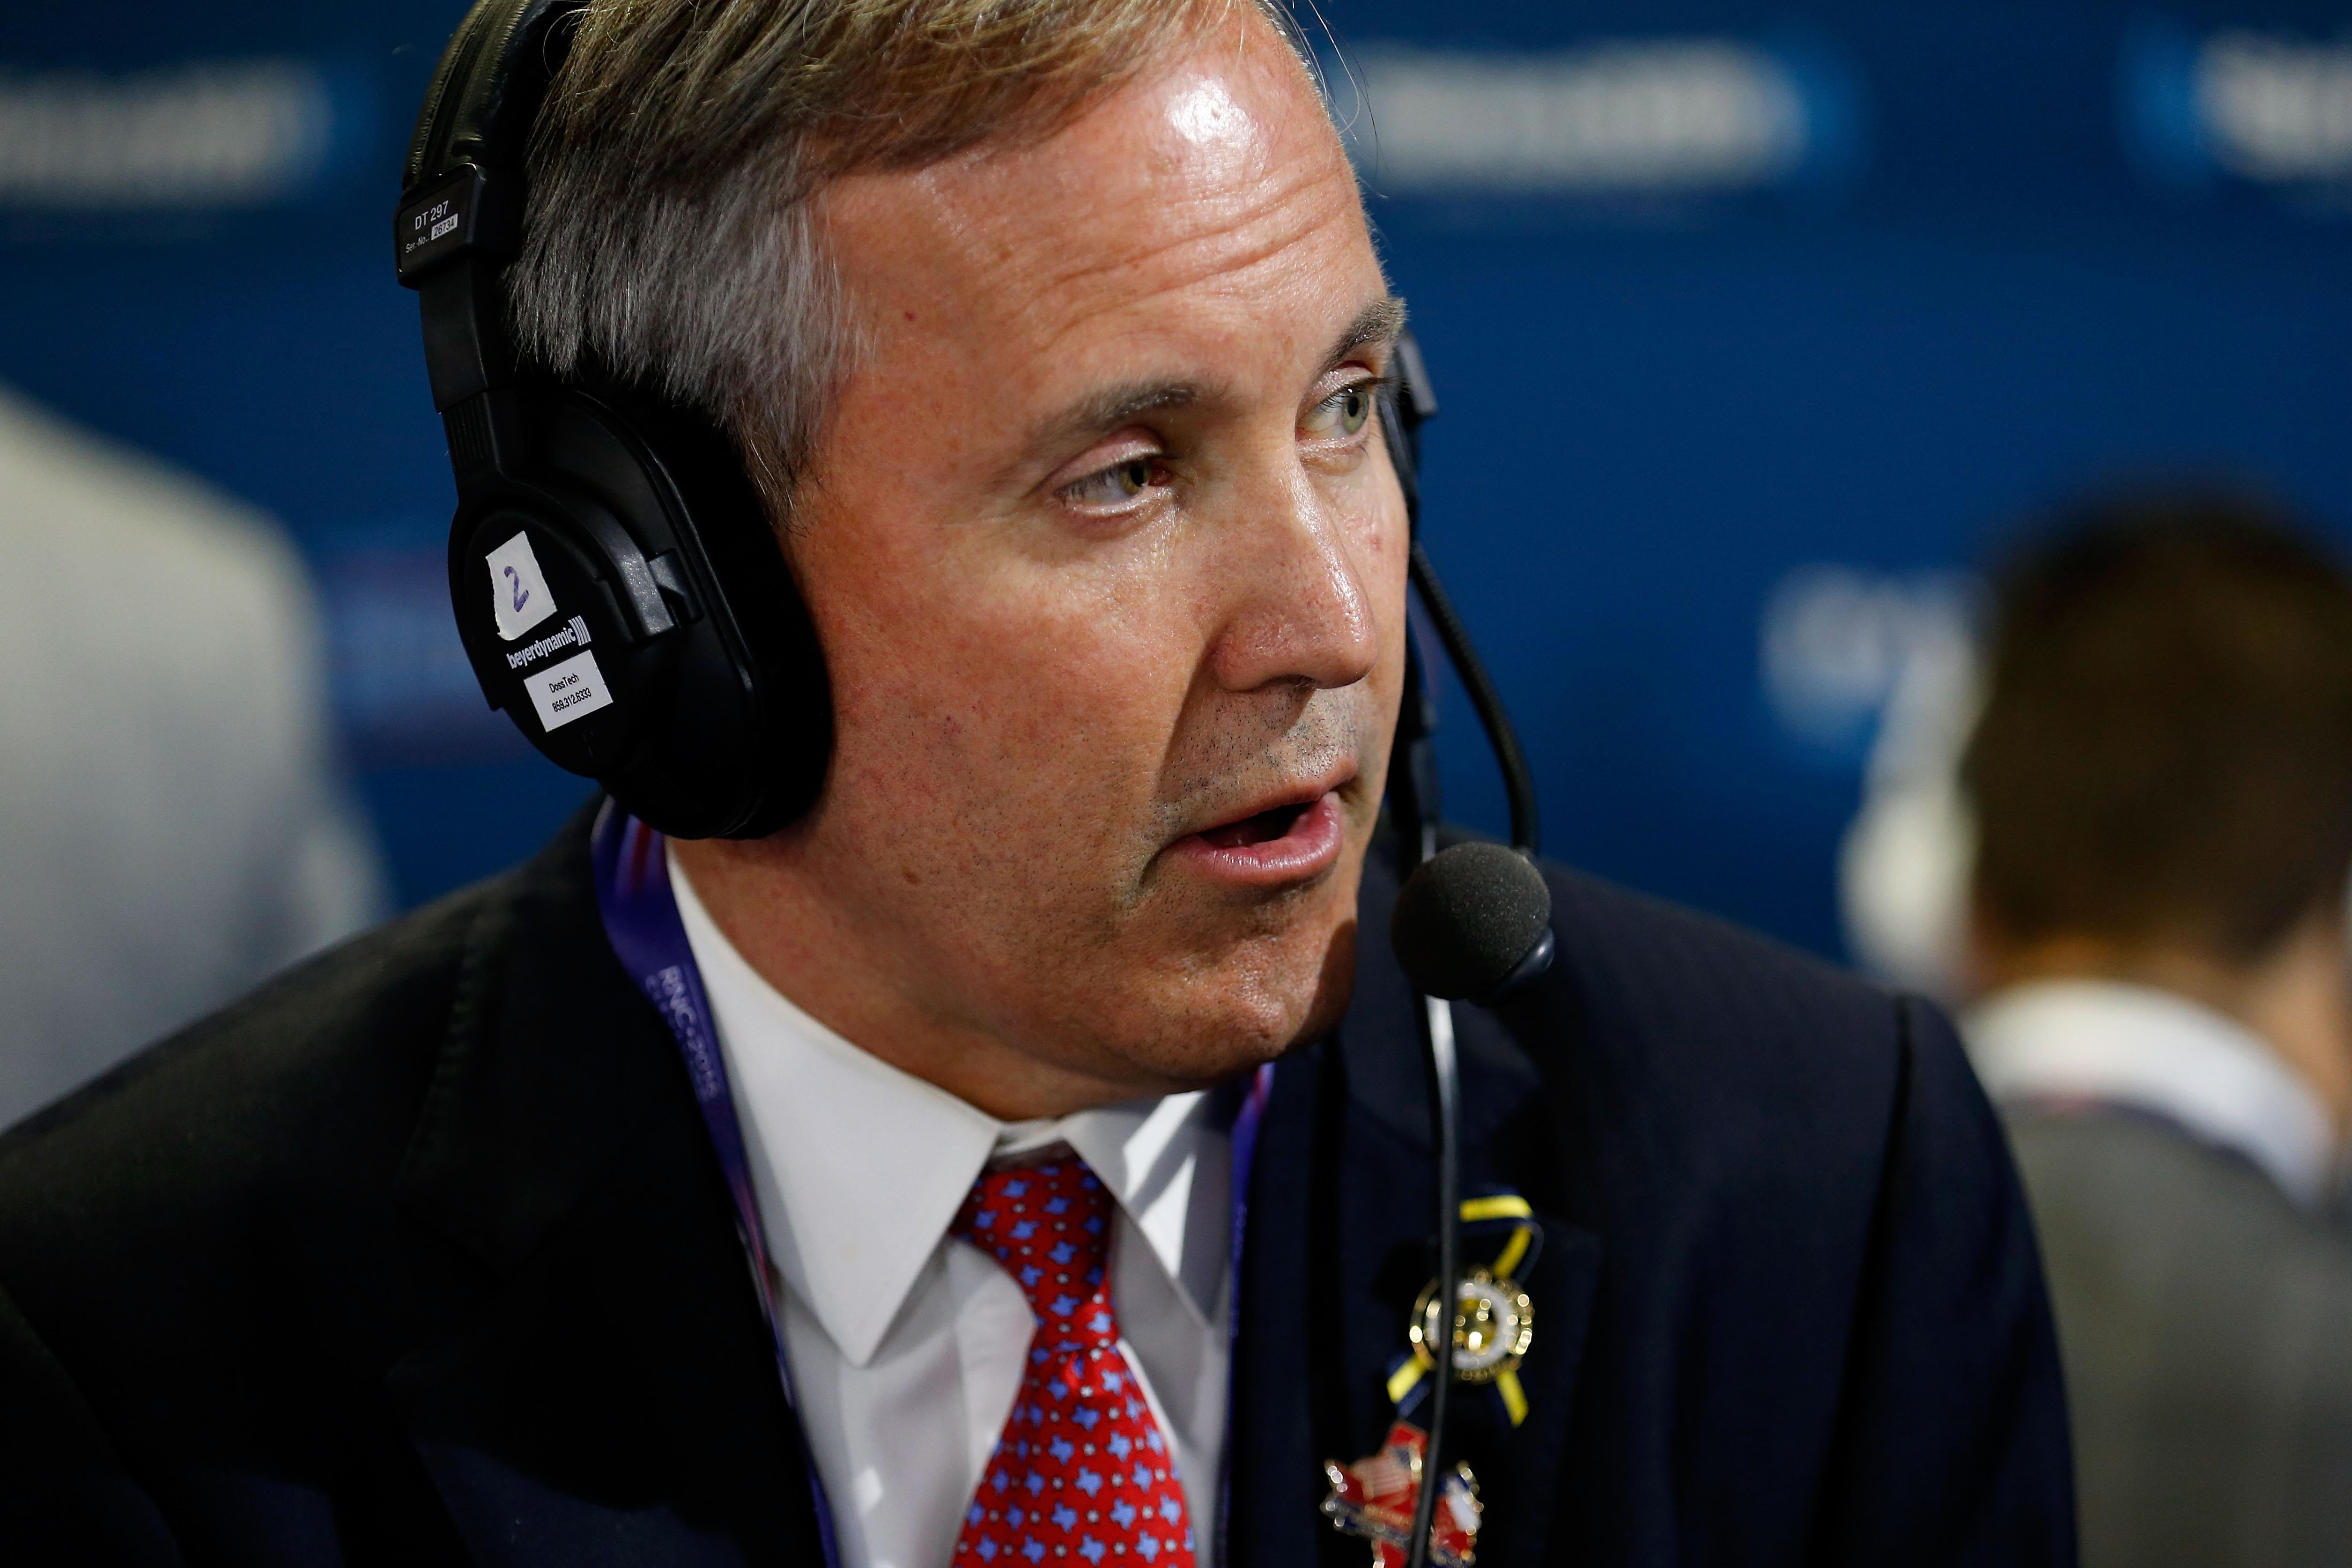 Texas Attorney General Ken Paxton, who pushed the bogus claim of voter fraud. (Photo by Kirk Irwin/Getty Images for SiriusXM)